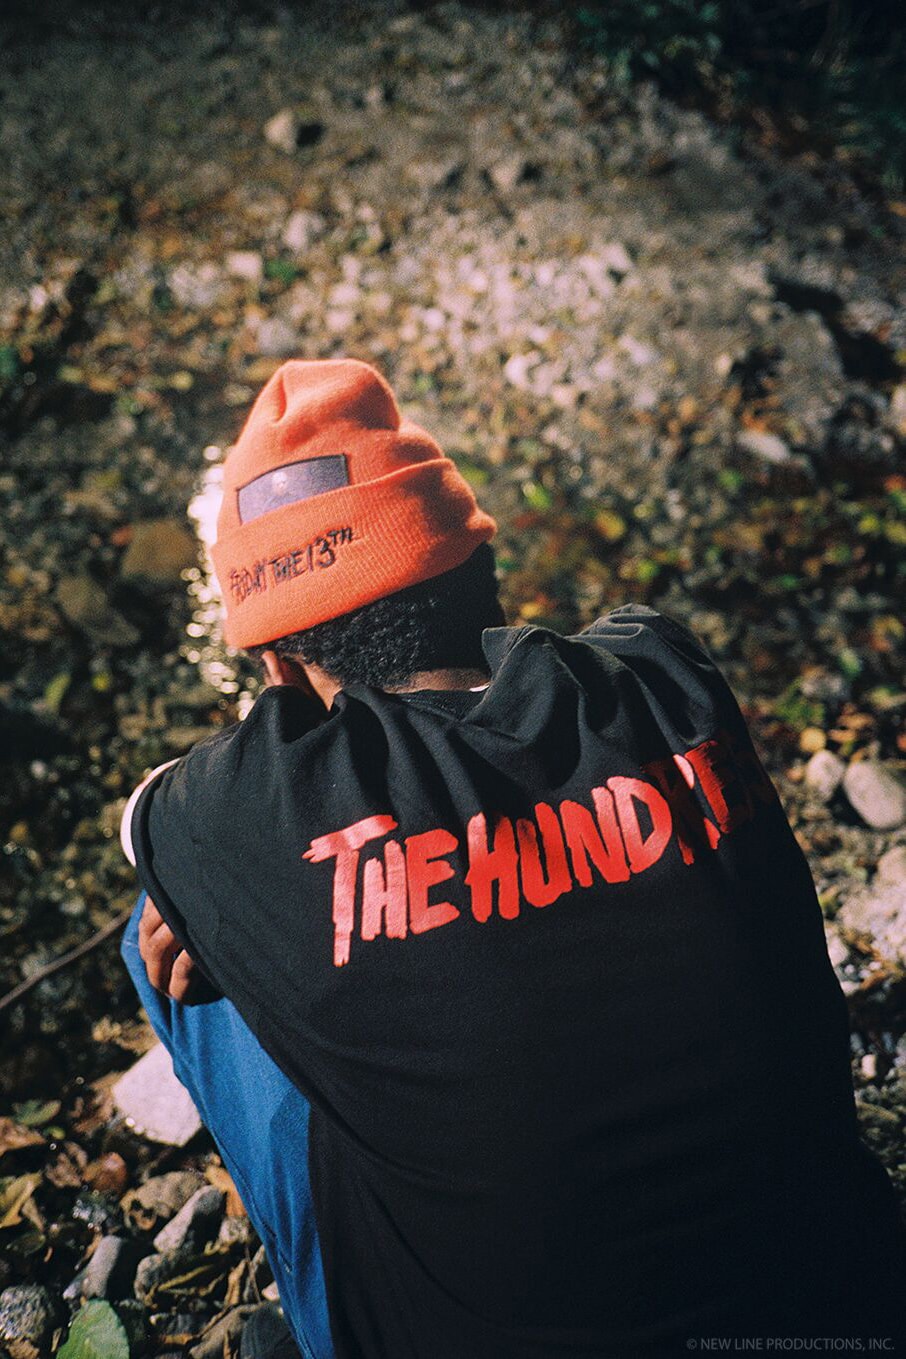 Friday The 13th x The Hundreds Capsule Collaboration Drop Release Halloween 2017 t-shirts hoodies jackets coaches beanies hockey mask Jason Voorhees